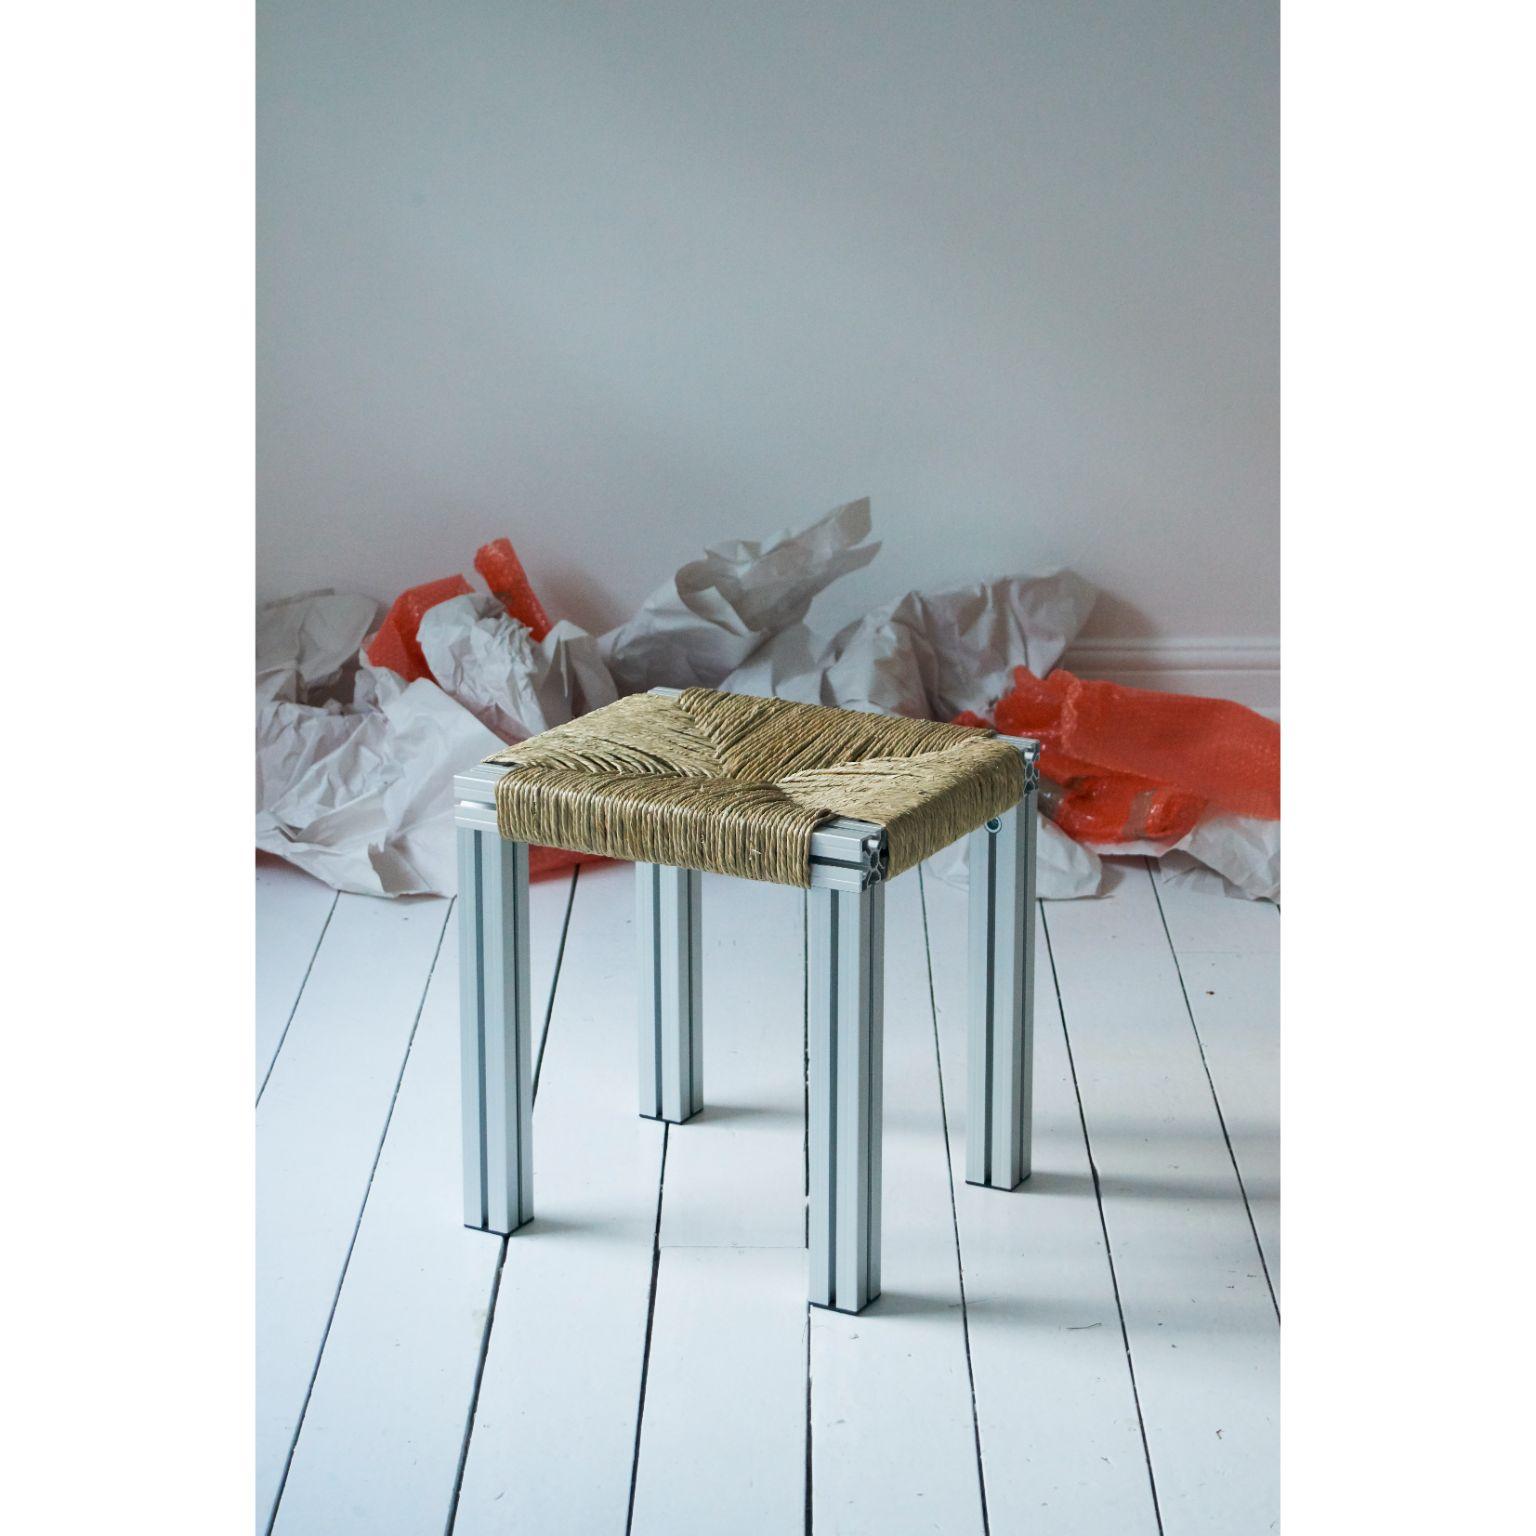 Anodized grey and rush weave wicker stool by Tino Seubert
Dimensions: D 43 x W 38 x H 45 cm.
Materials: Grey anodised aluminum extrusions, rush.

Tino Seubert
When he first made his now signature wicker and aluminium stools and benches in 2018